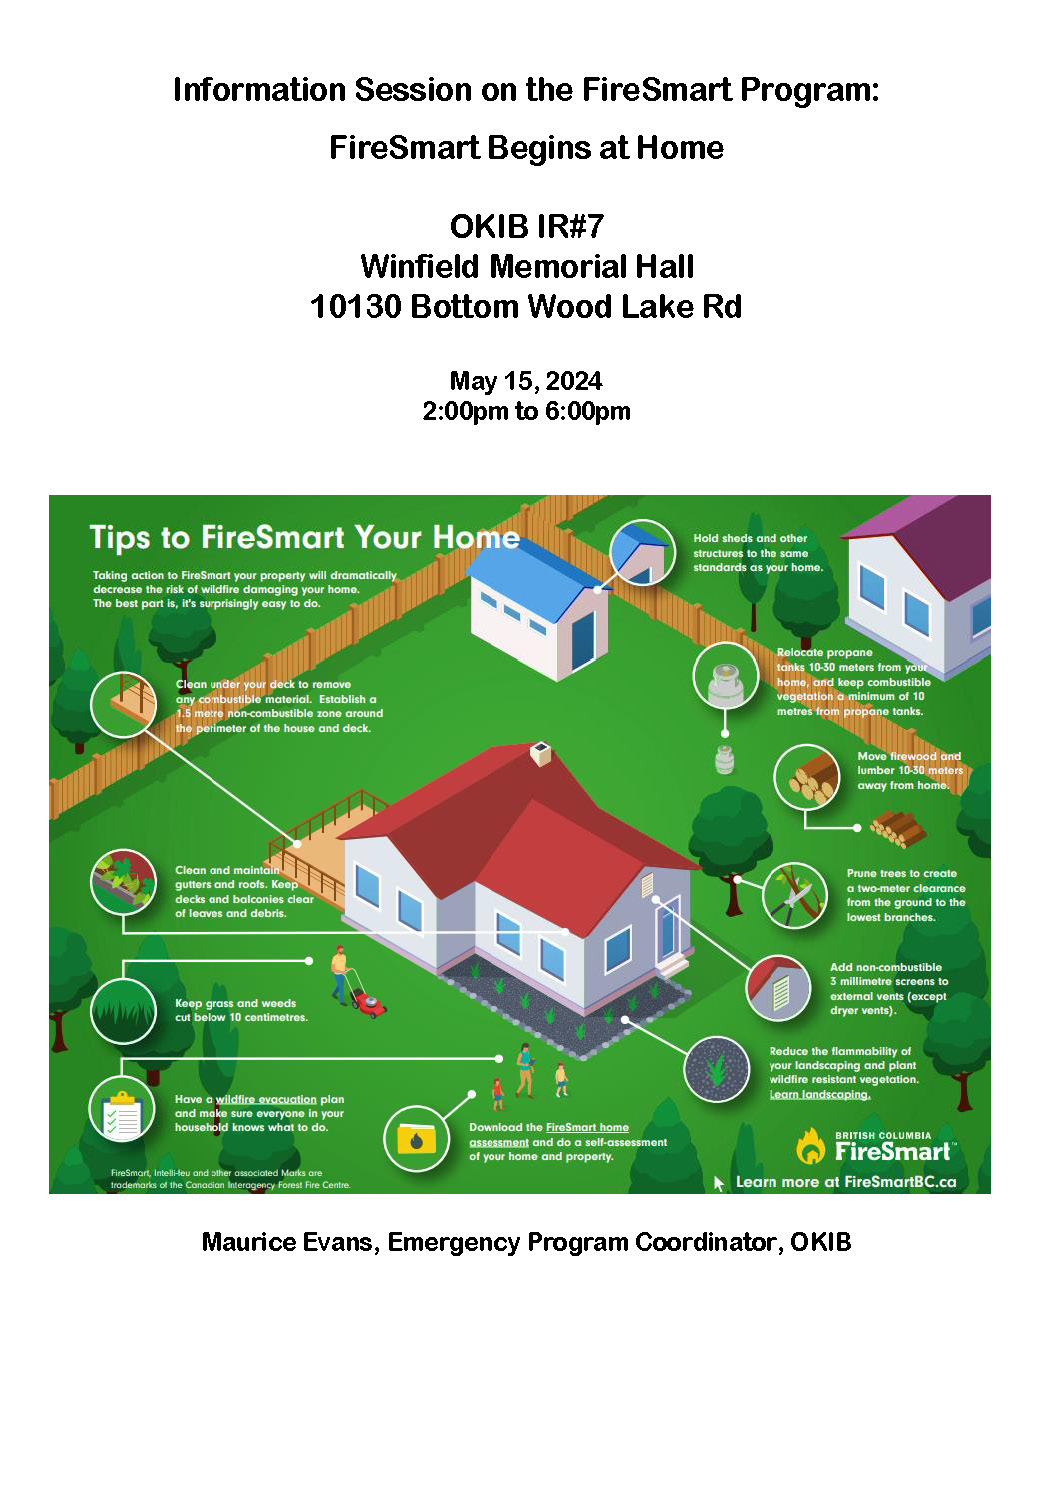 Information Session on the FireSmart Program: FireSmart Begins at Home@Winfield Memorial Hall 10130 Bottom Wood Lake Rd, May 15, 2:00pm to 6:00pm.